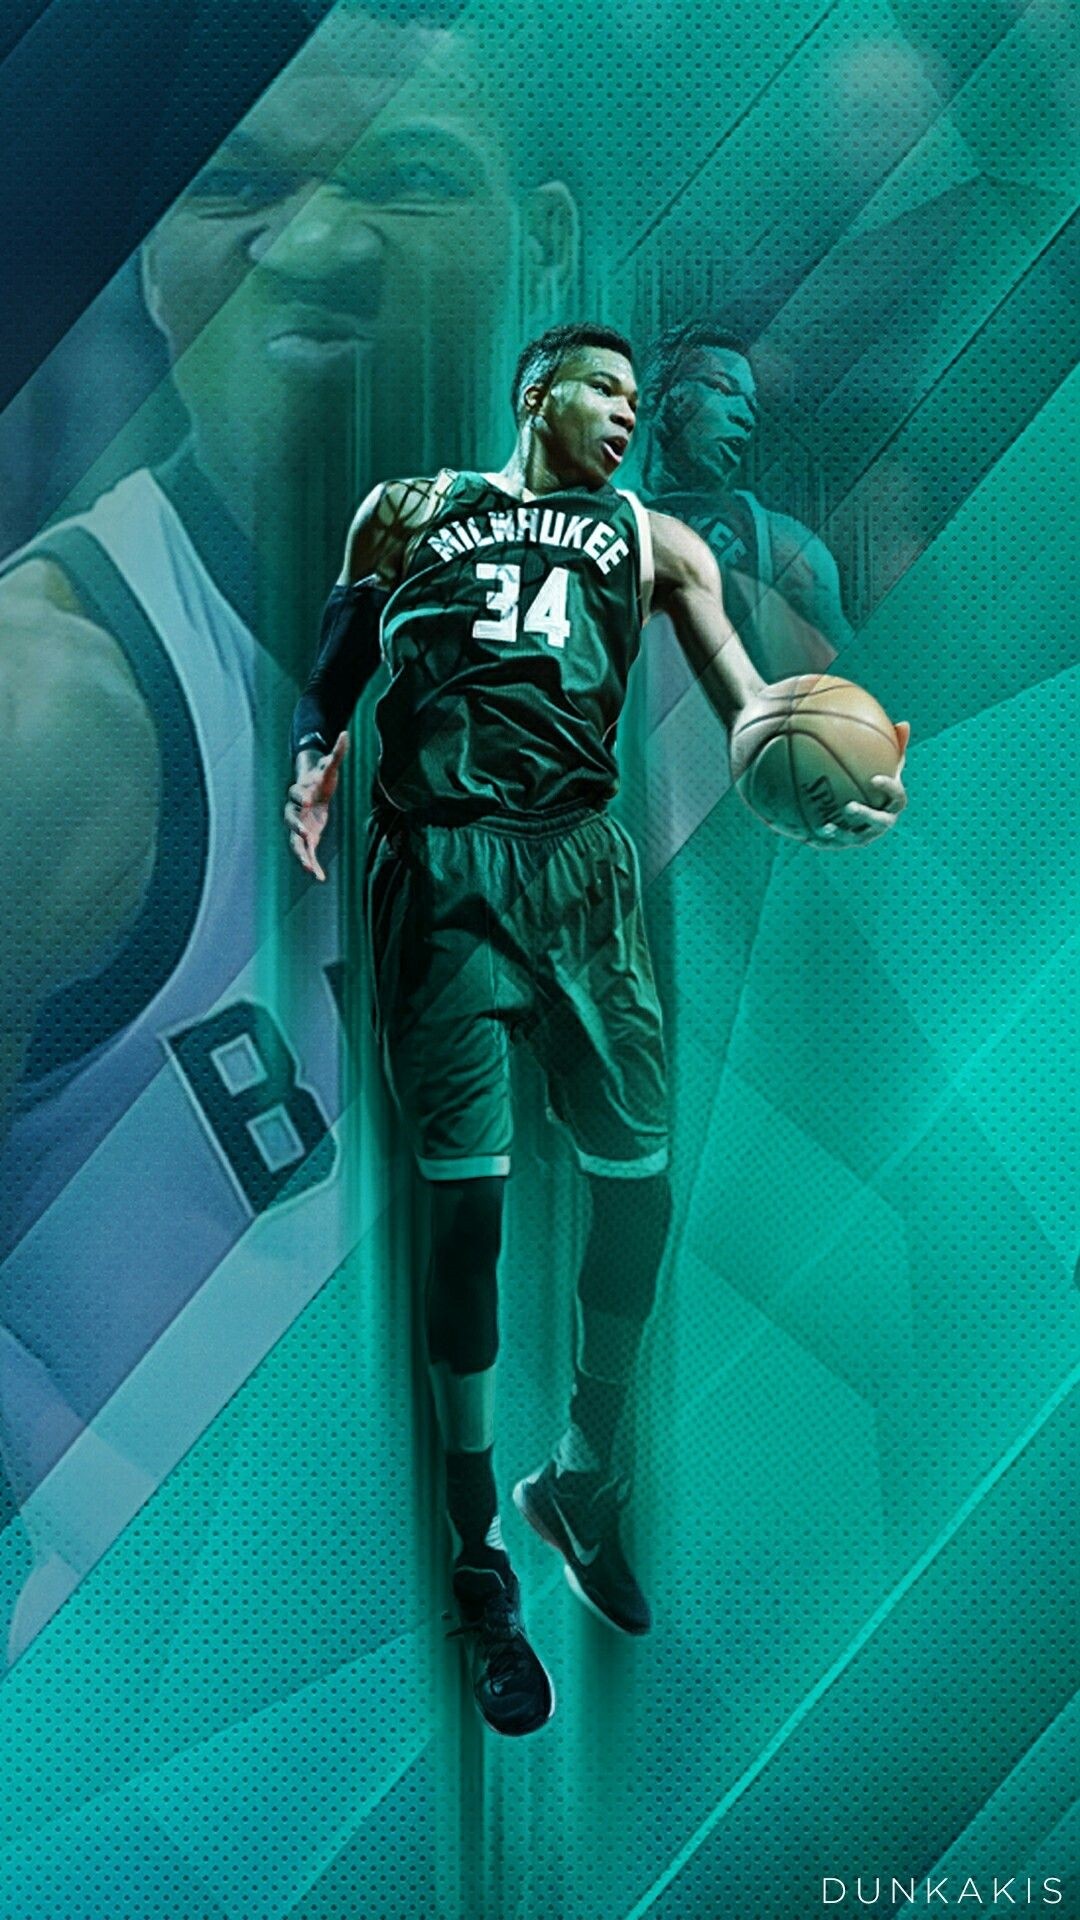 640x1136 Resolution Giannis Antetokounmpo NBA Champion iPhone 55c5SSE  Ipod Touch Wallpaper  Wallpapers Den